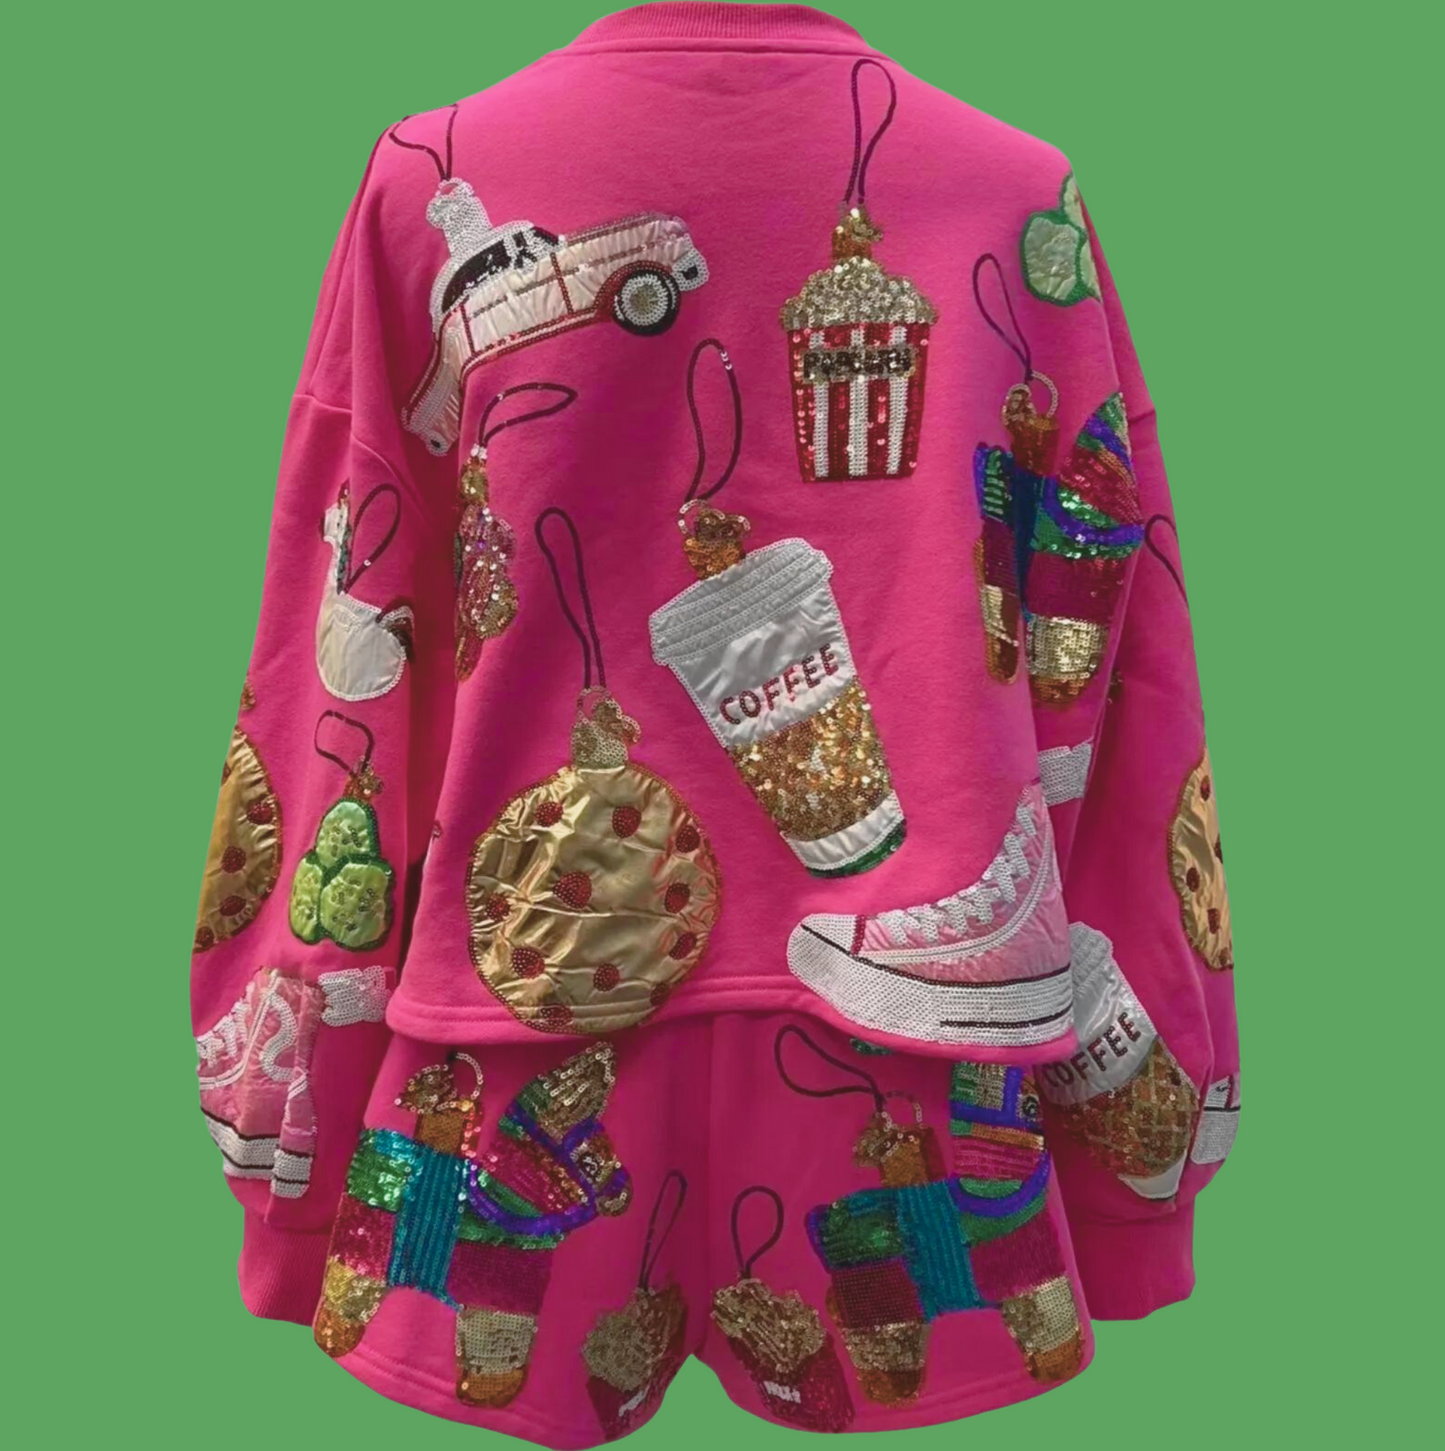 Queen of Sparkles Pink Scatter Christmas Icon Ornament Sweatshirt & Shorts Set